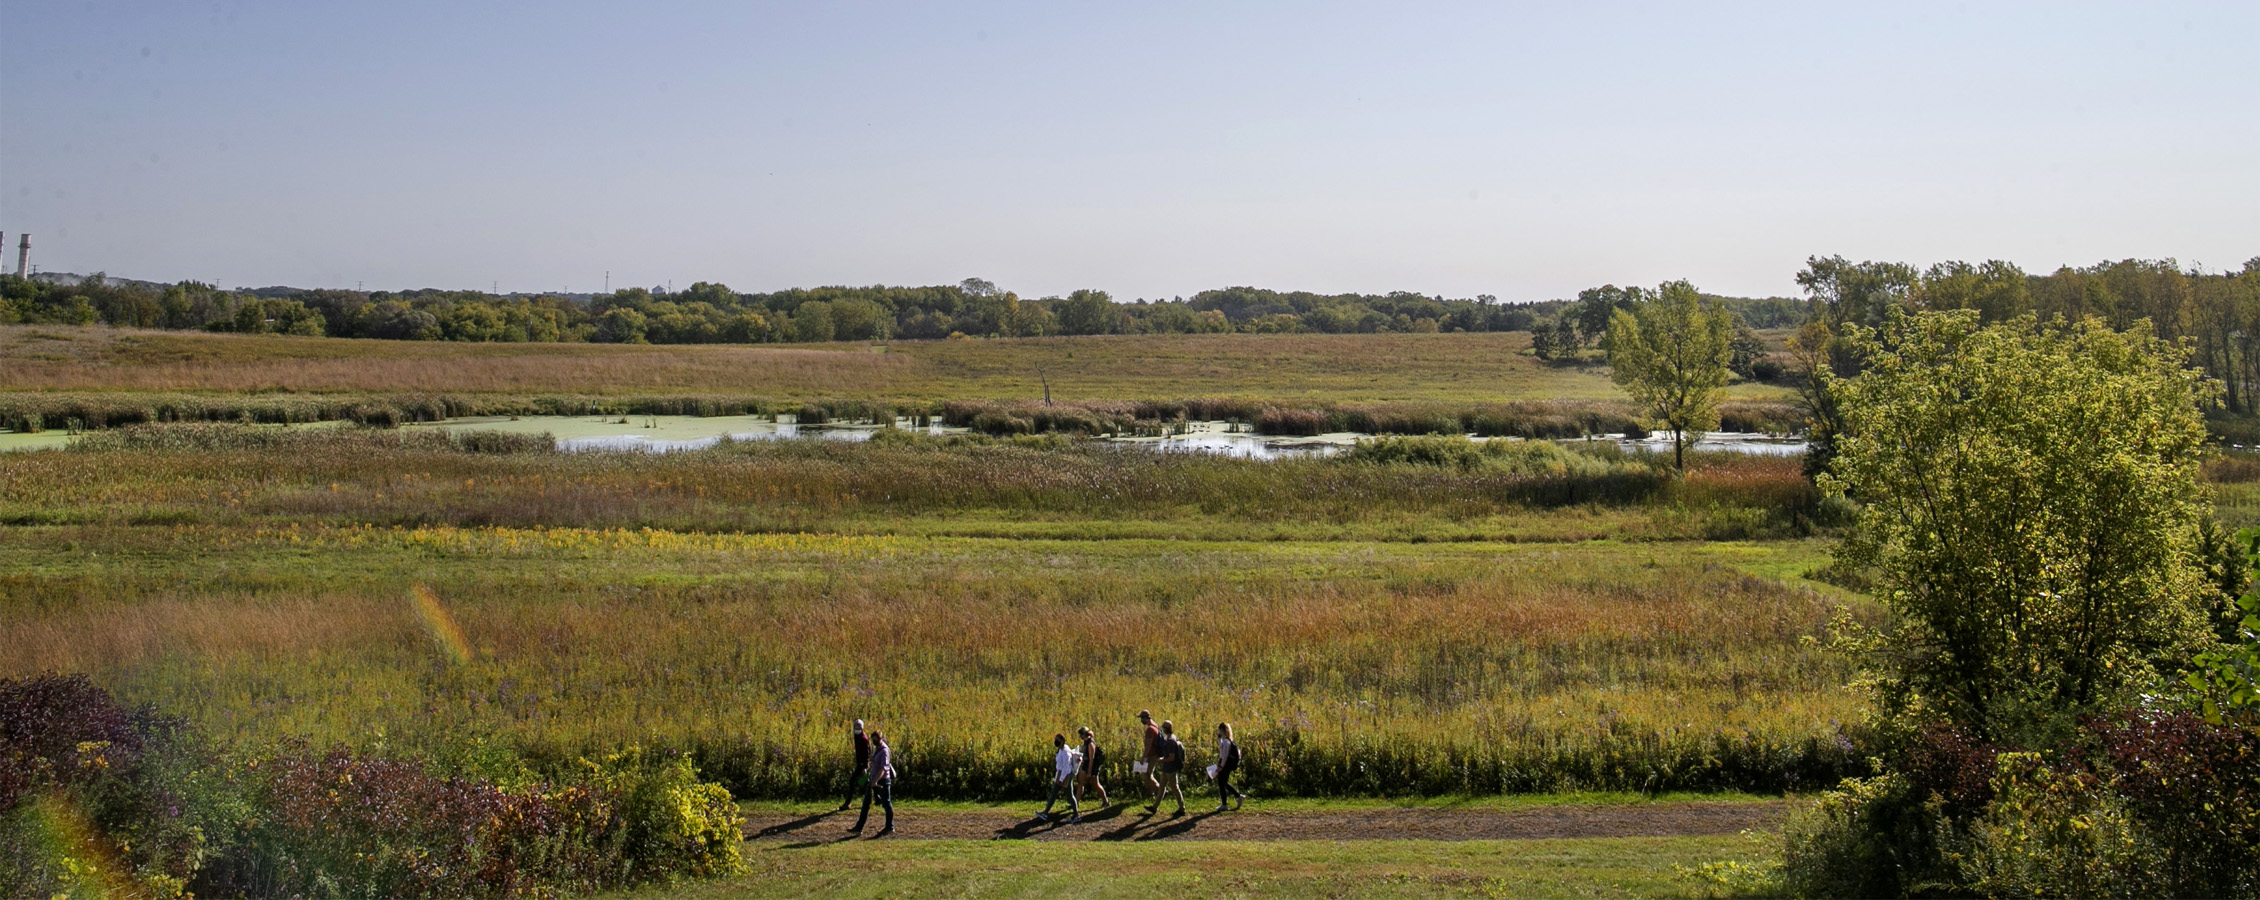 Students walk through an open field with a small body of water.